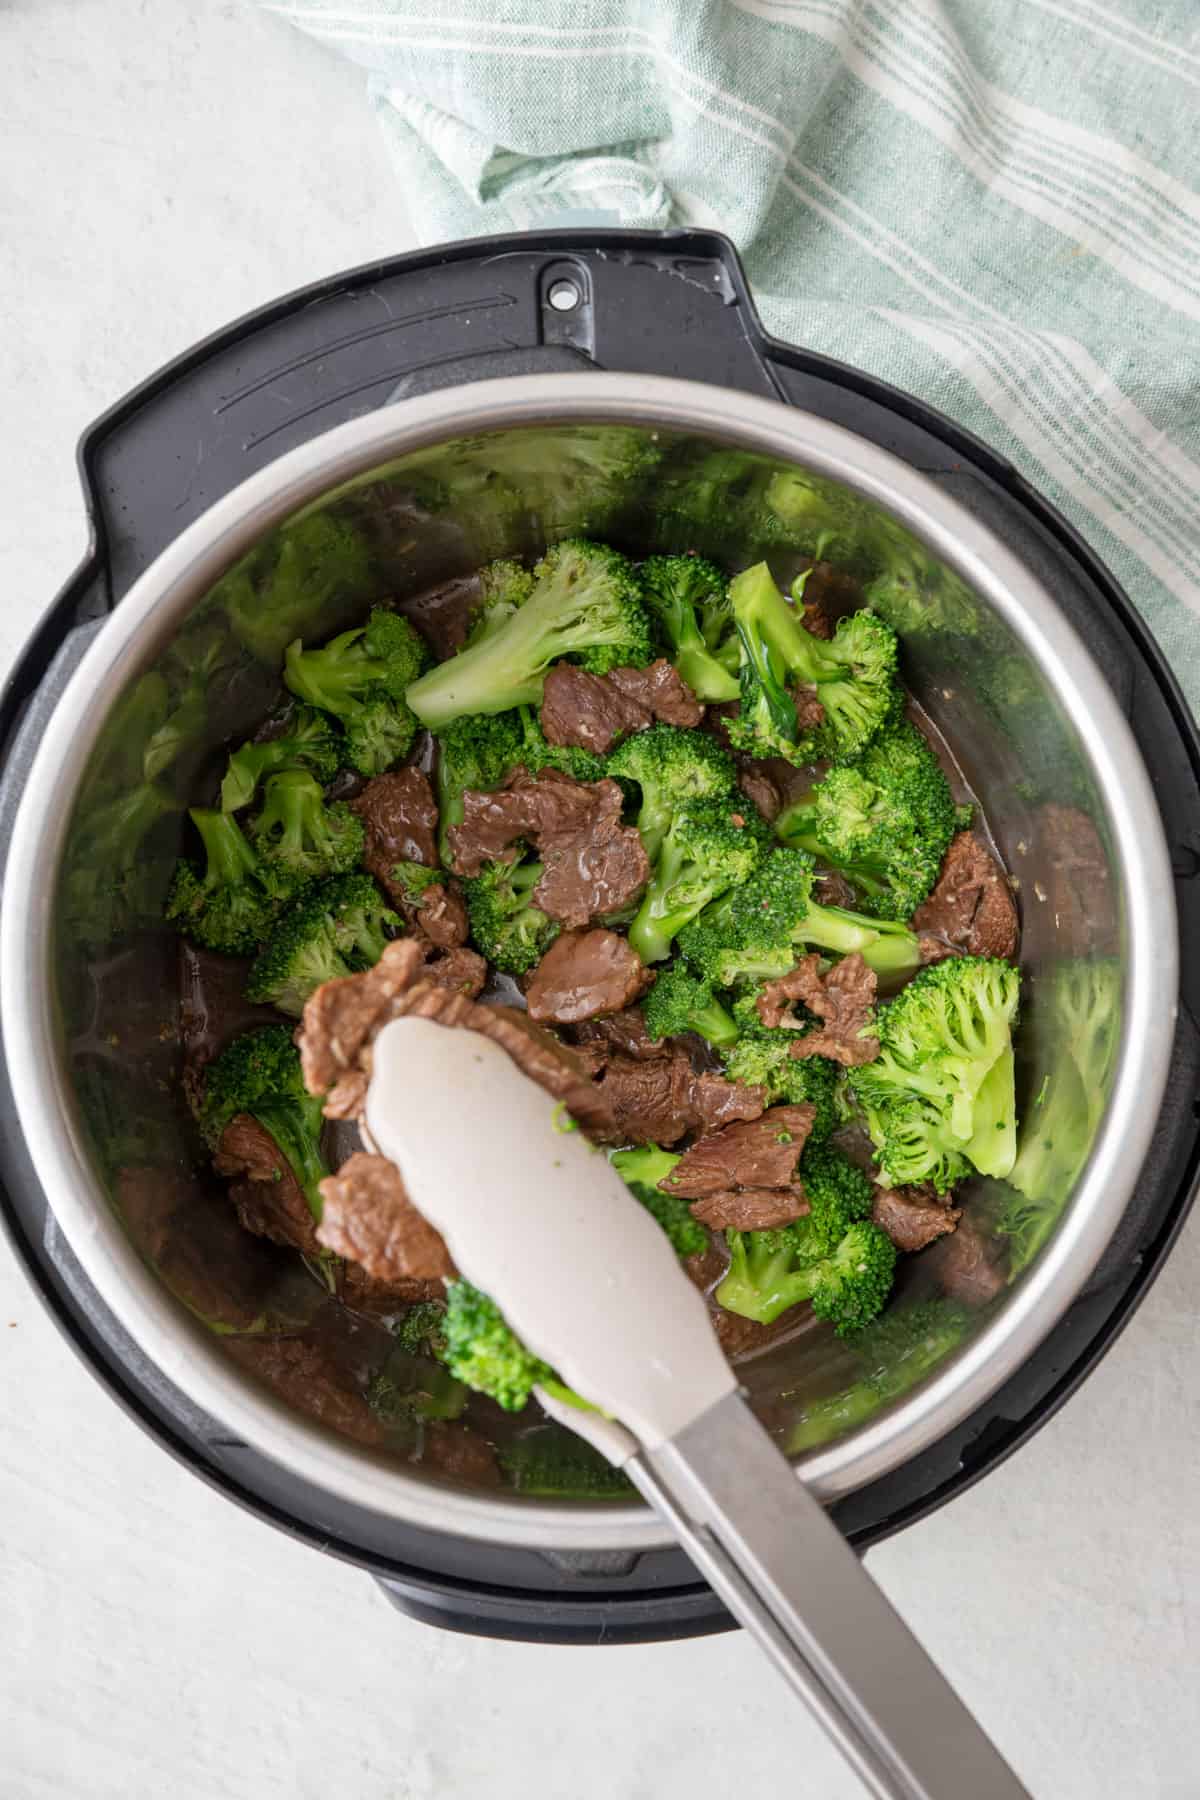 Tongs scooping up beef and broccoli from Instant Pot.